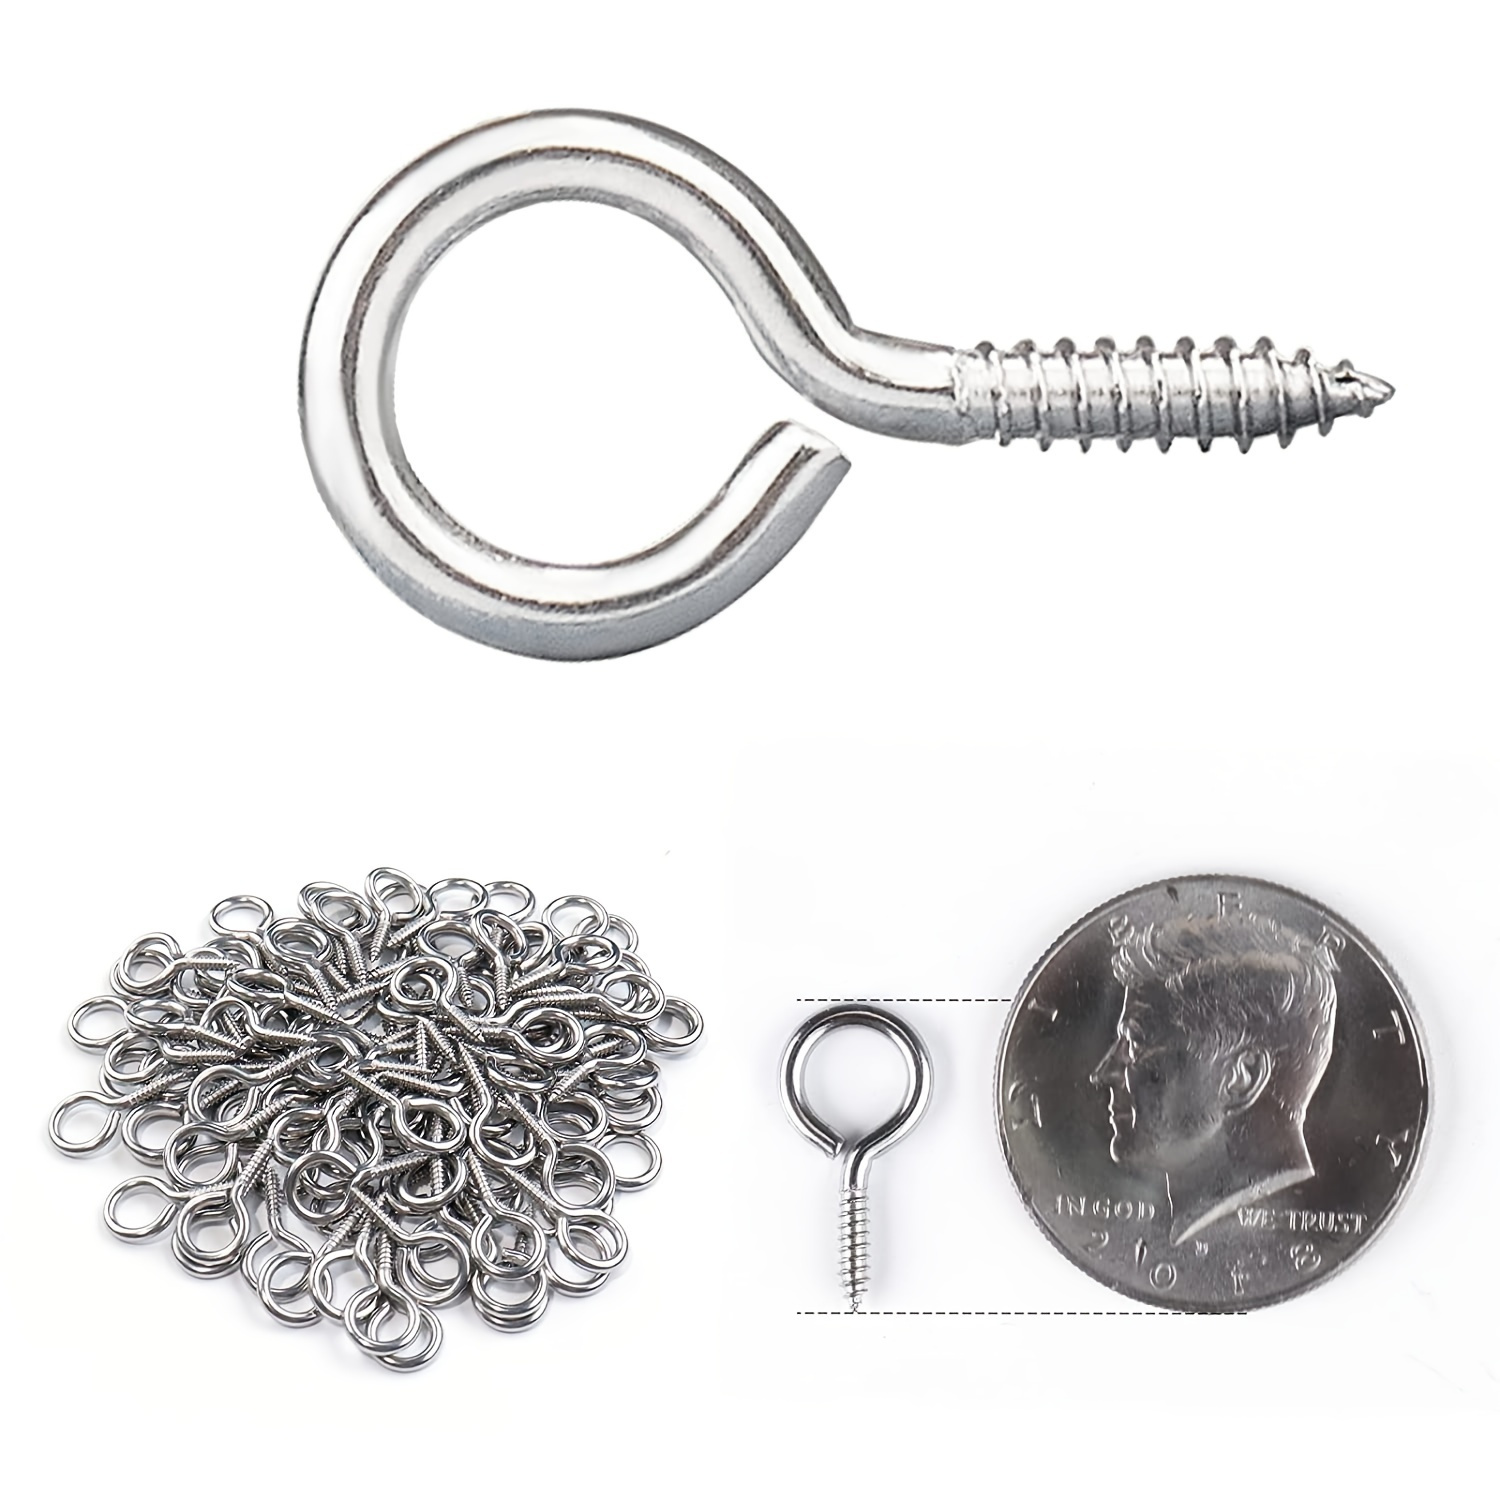 

100pcs 7/8 Inch M3 Size Screw Eye Hook, Wood Screw Metal Hook, T316 Stainless Steel Wood Fixed Cable Wire Terminal Ring Eye Self Tapping With Eye Bolt Indoor Outdoor Cn18 Hn2